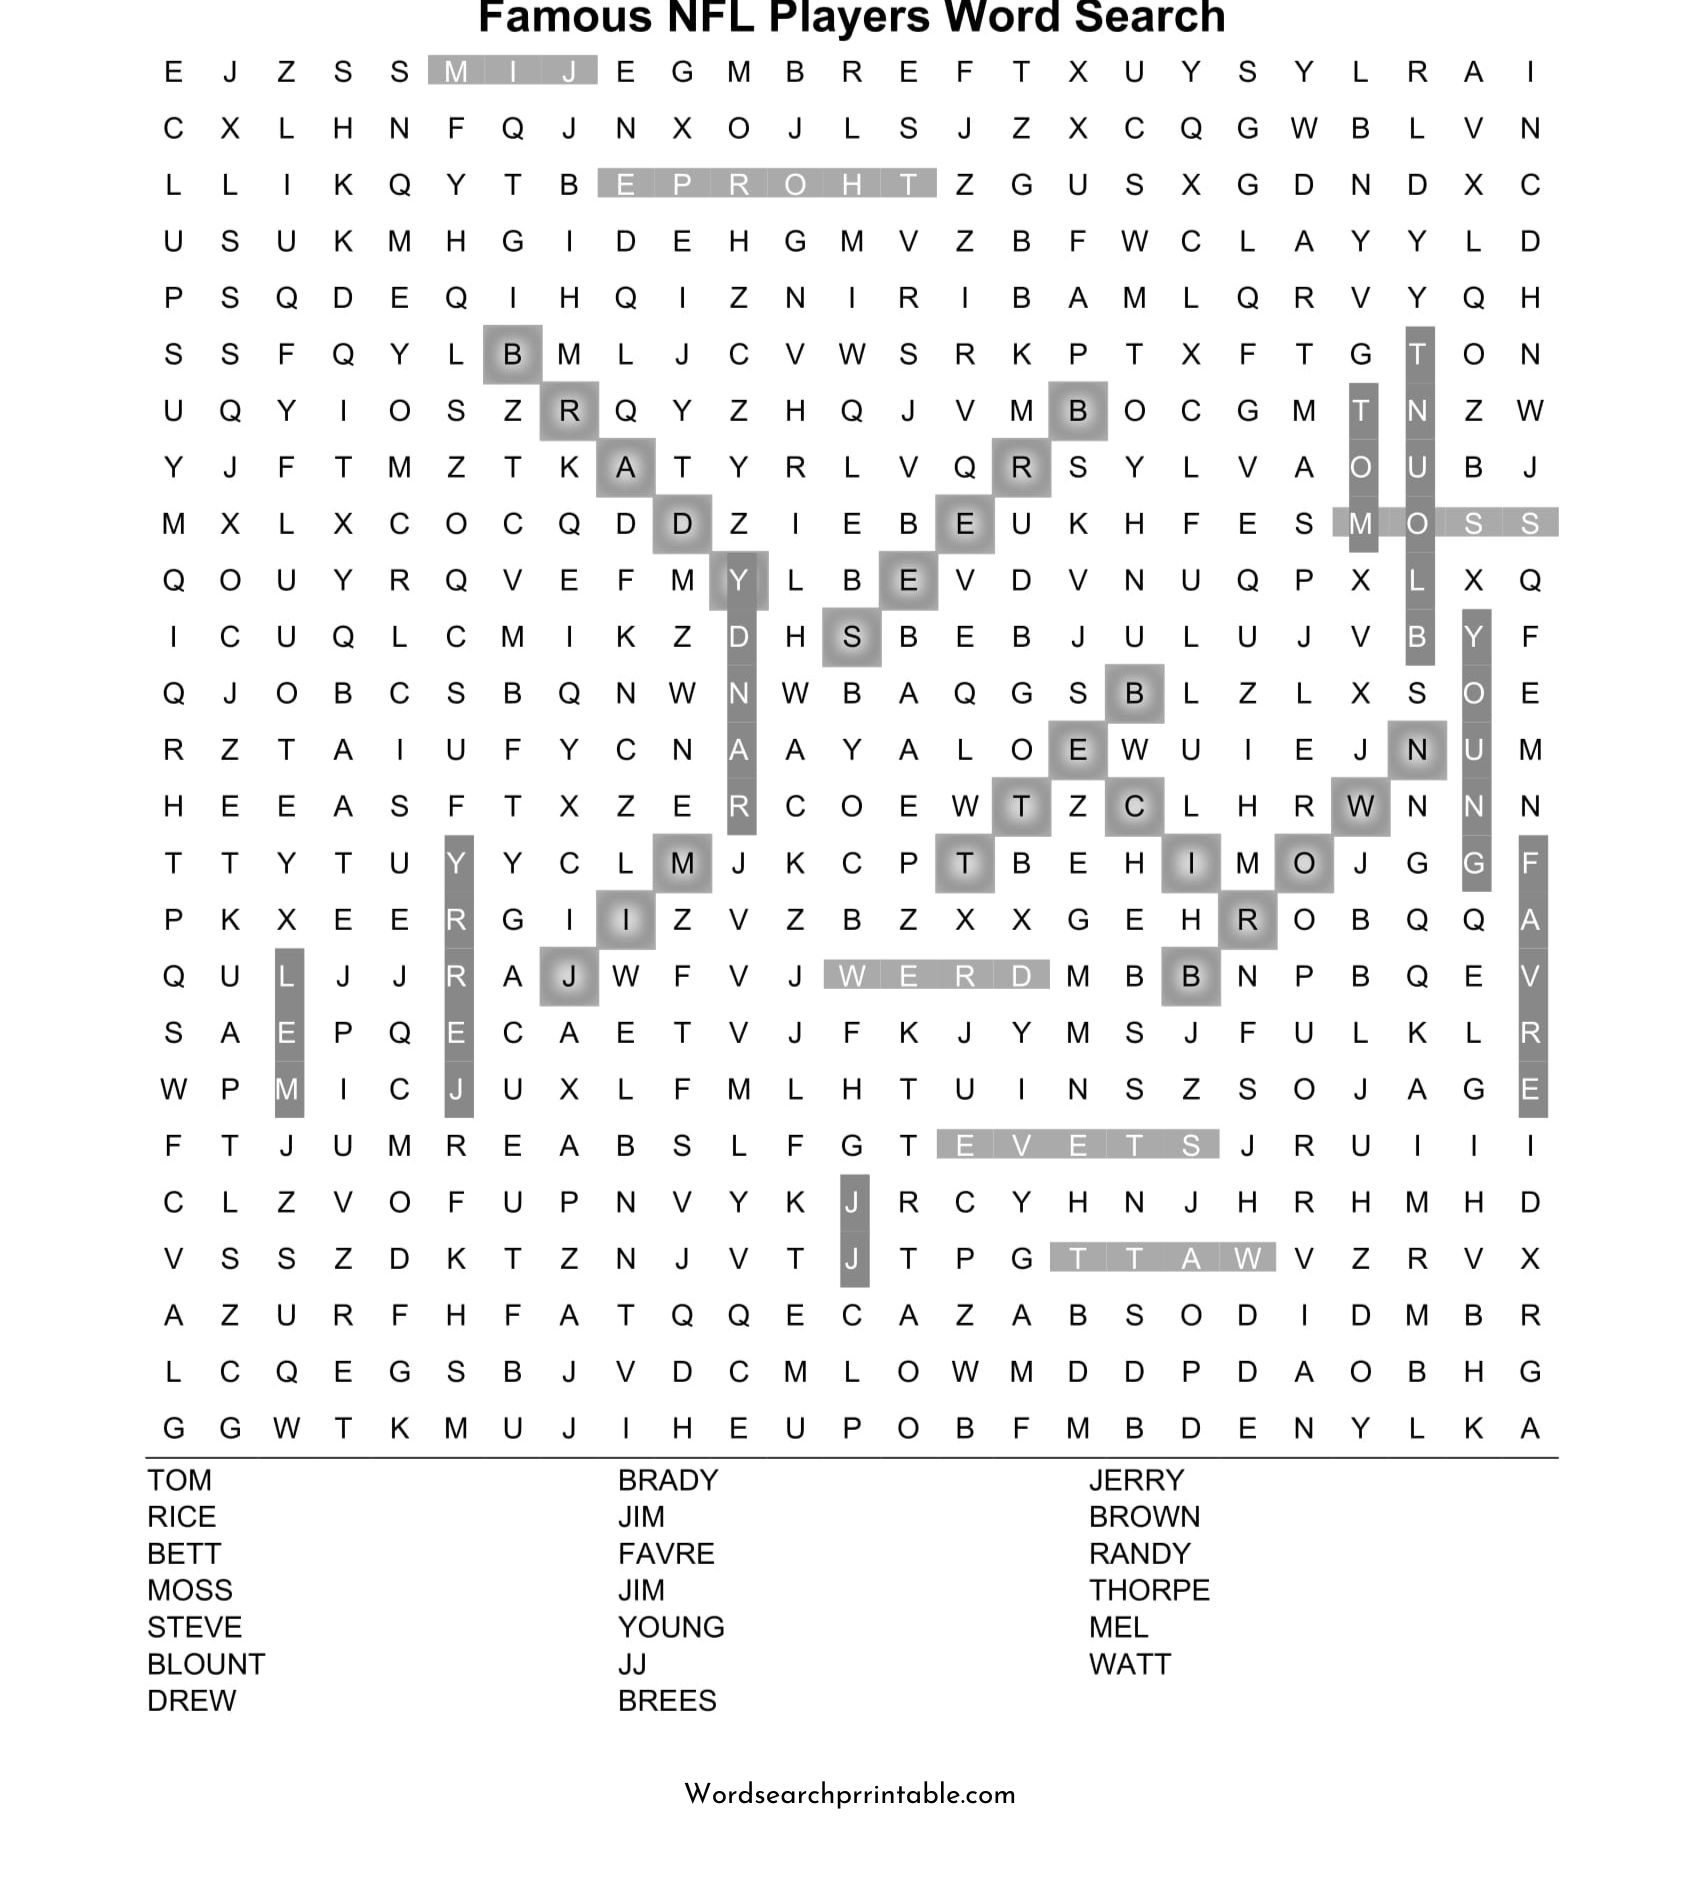 famous nfl players word search puzzle solution